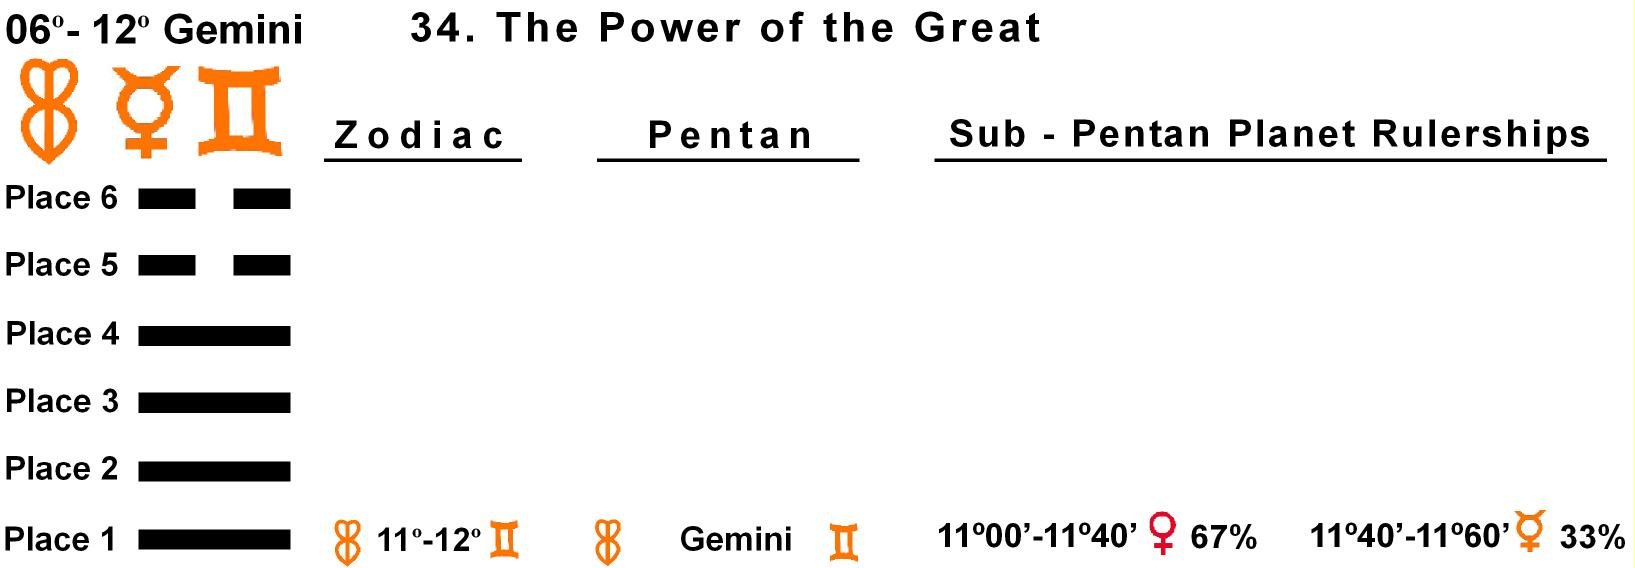 Pent-lines-03GE 11-12 Hx-34 Power Of The Great